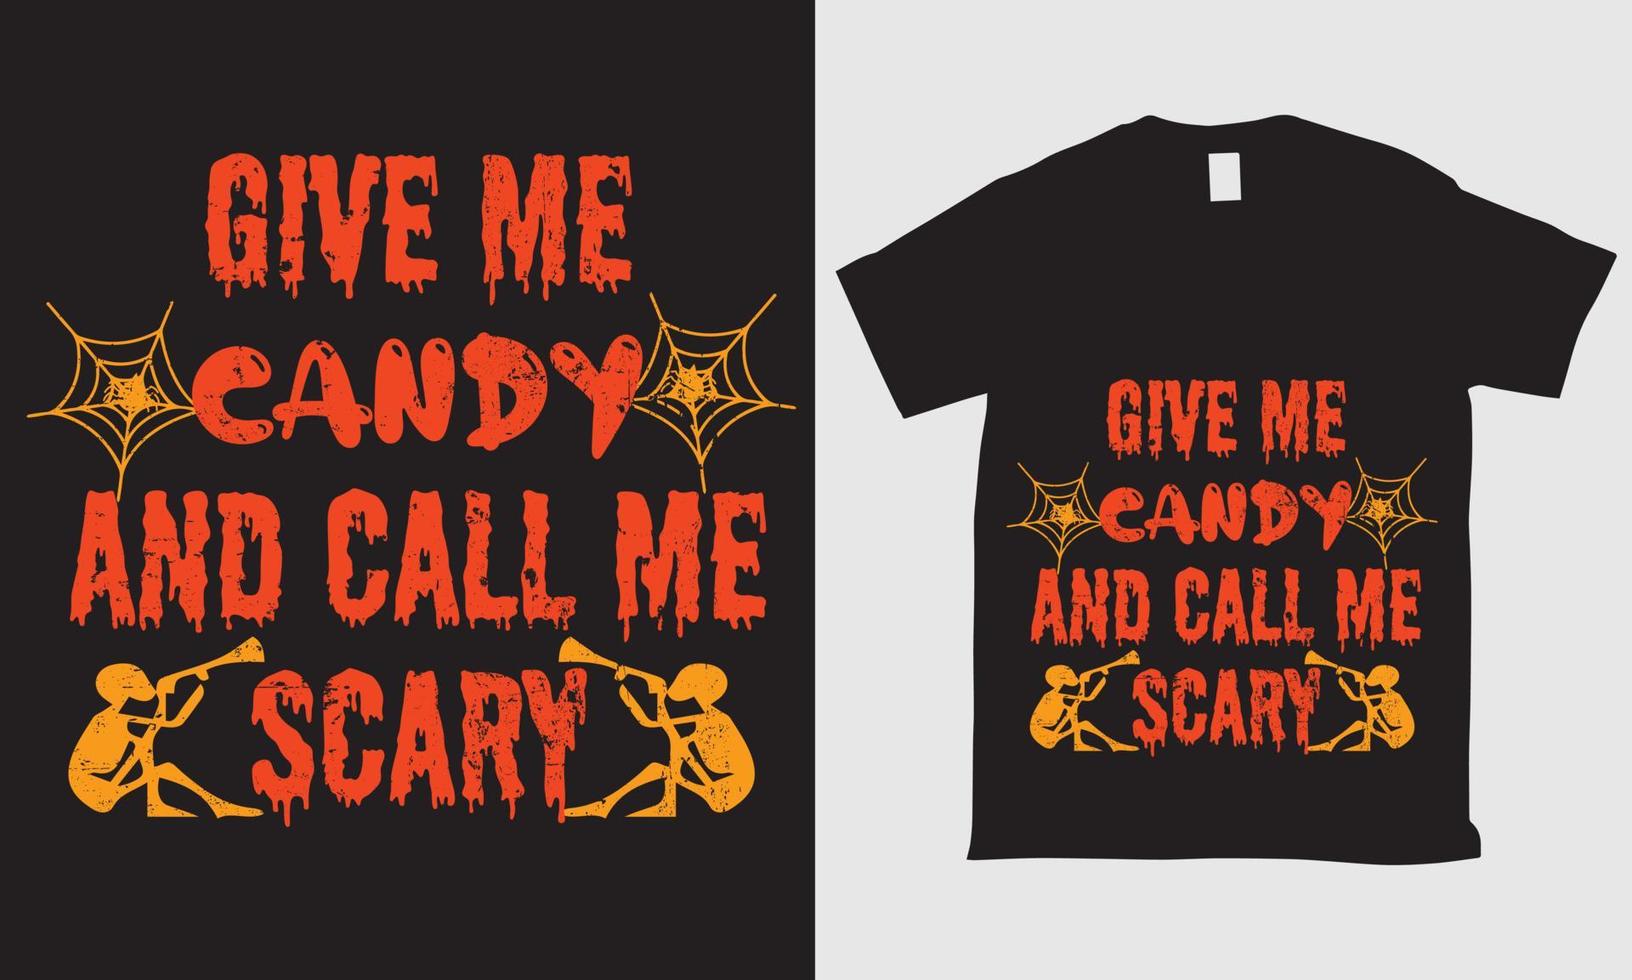 Give me candy and call me scary Grunge typography tshirt Design vector